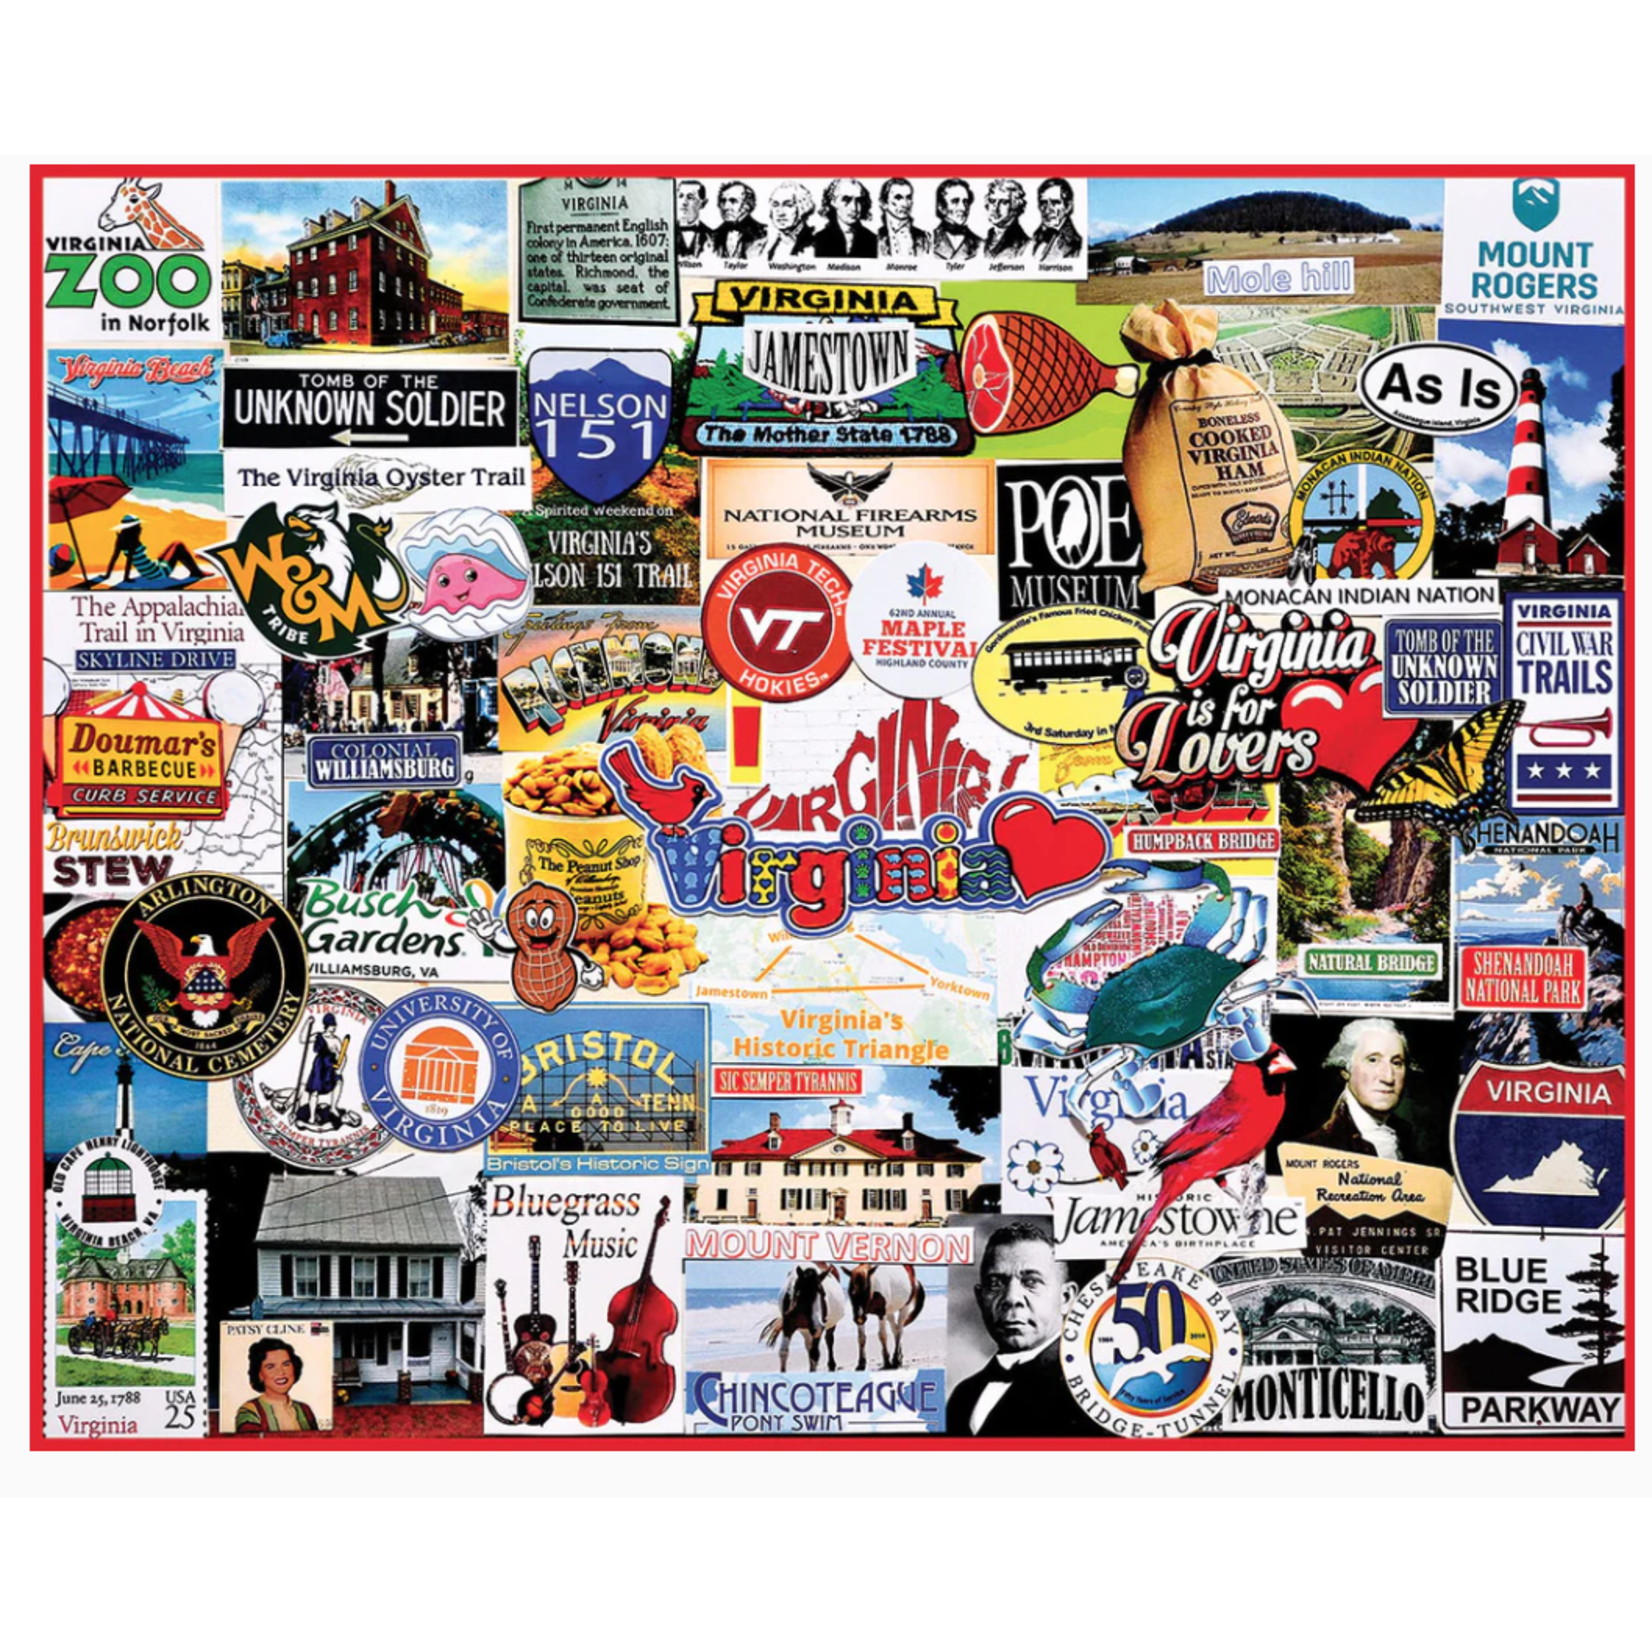 White Mountain Puzzles I Love Virginia, 1000-Piece Jigsaw Puzzle